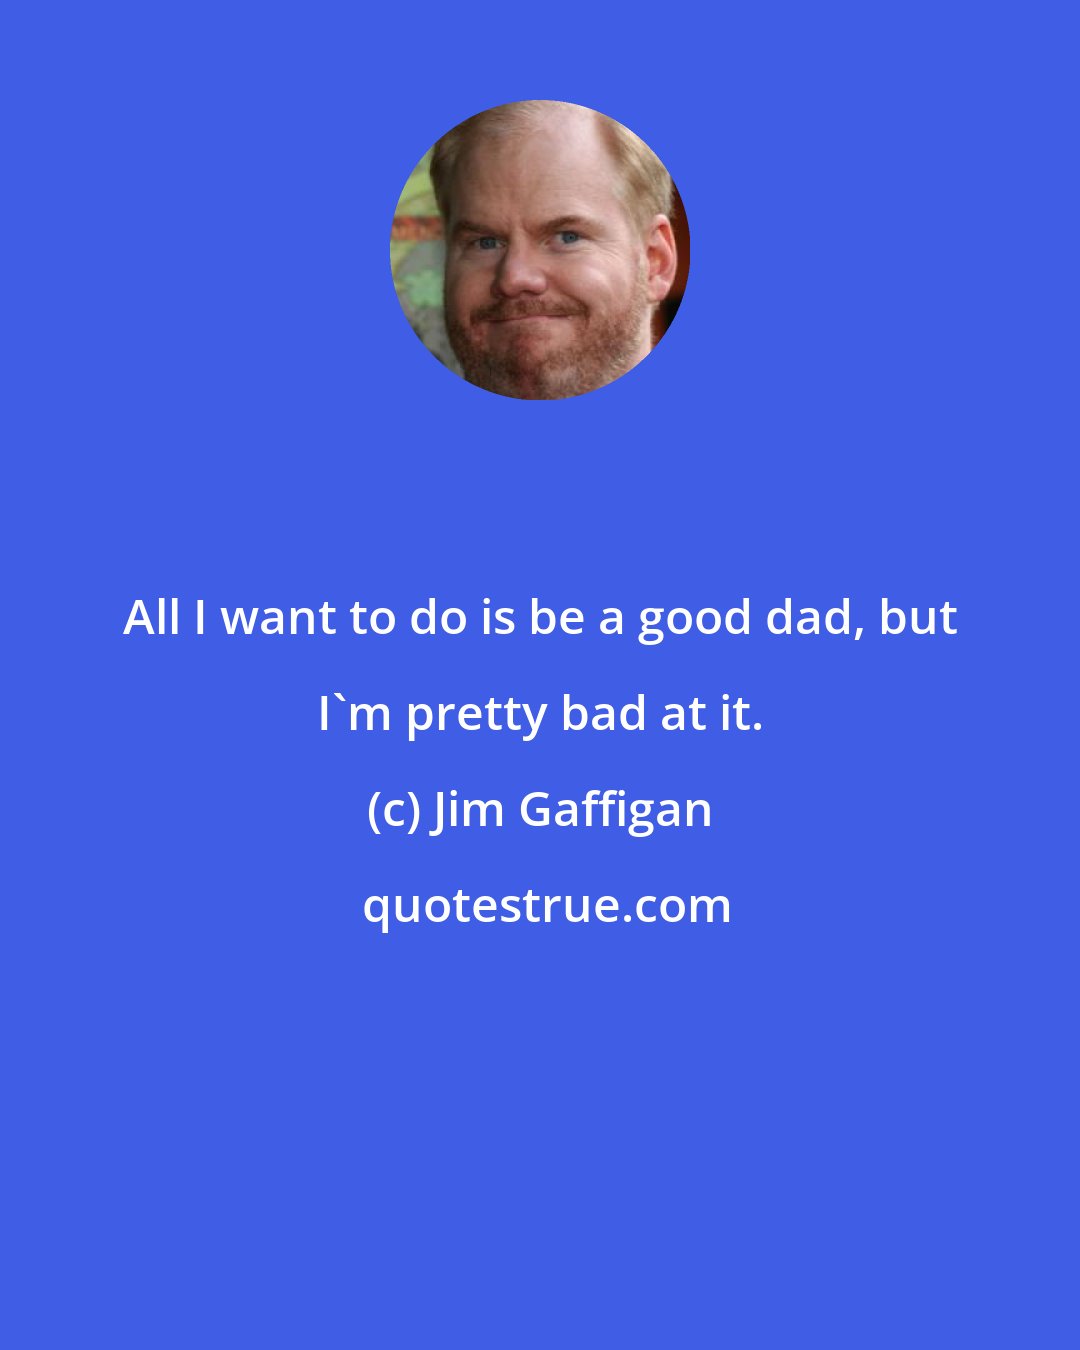 Jim Gaffigan: All I want to do is be a good dad, but I'm pretty bad at it.